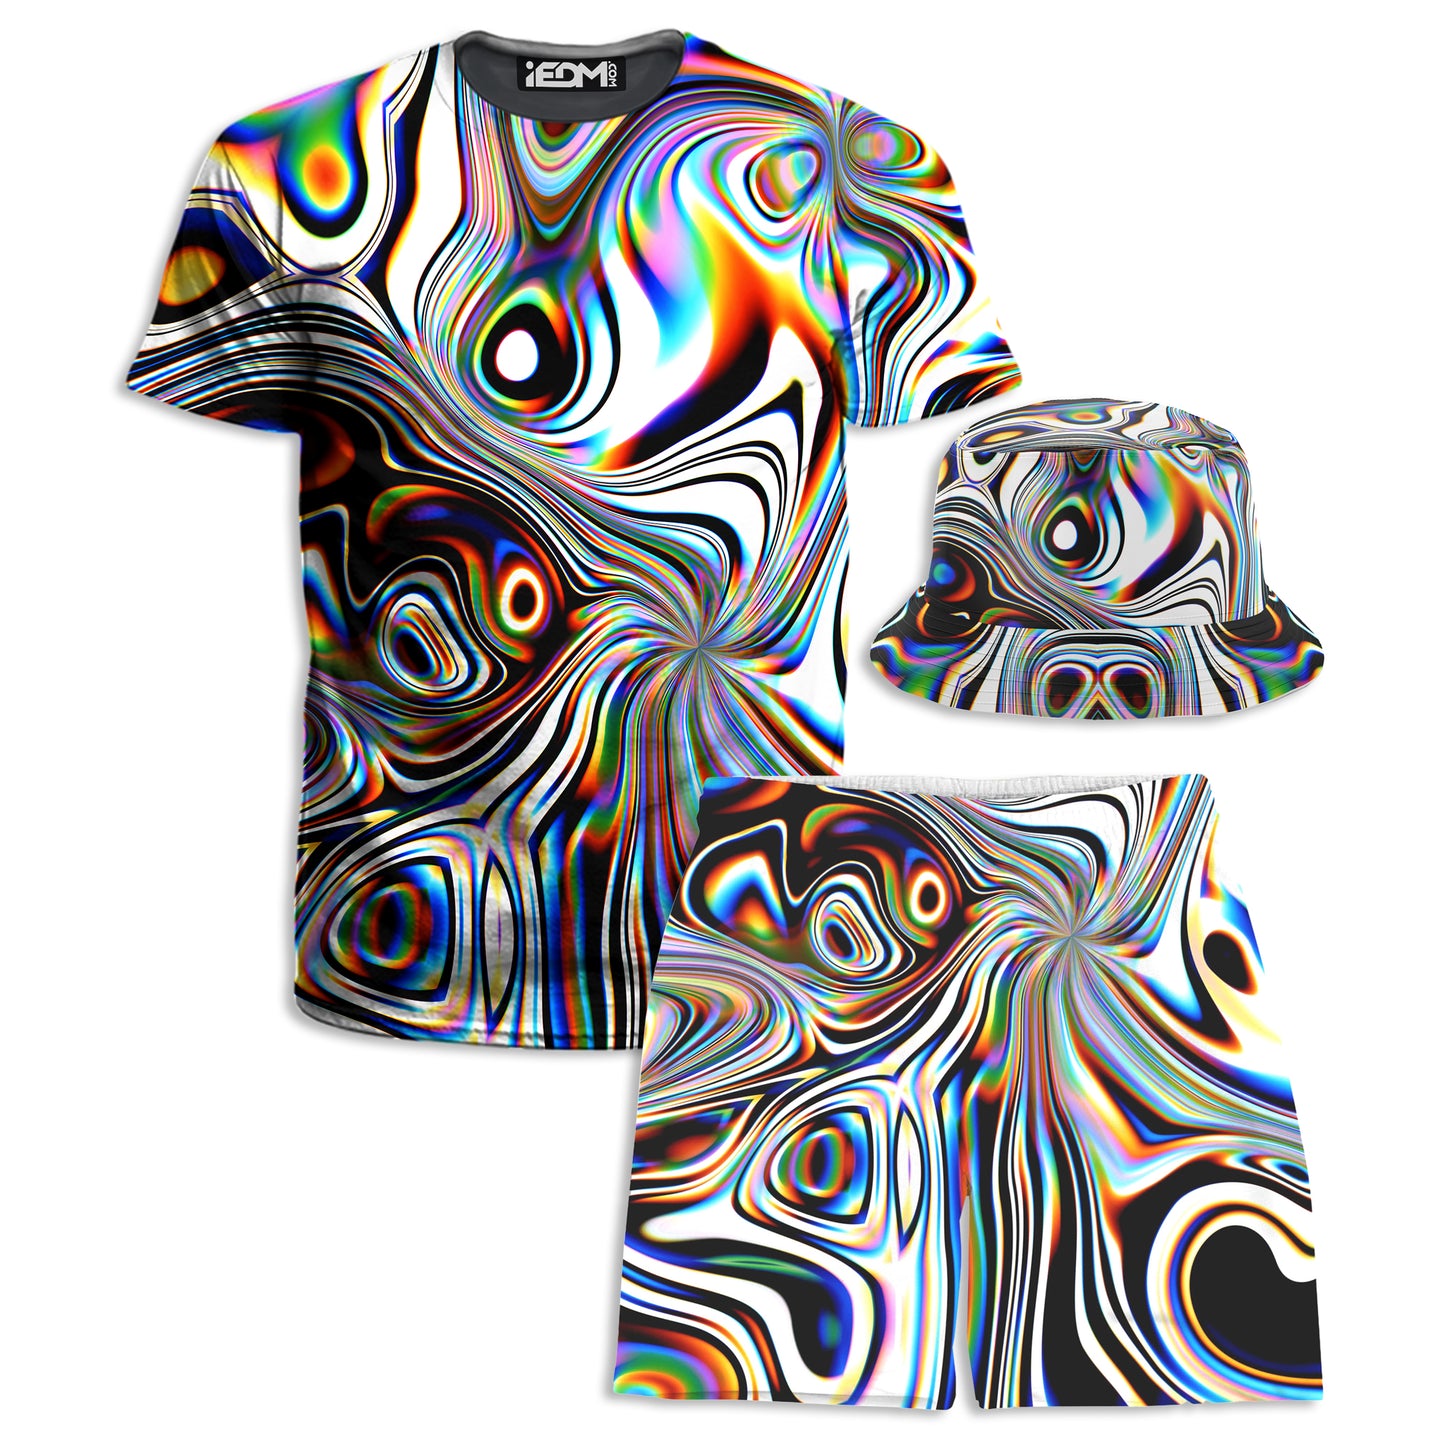 Oil Aura T-Shirt and Shorts with Bucket Hat Combo, Glass Prism Studios, | iEDM